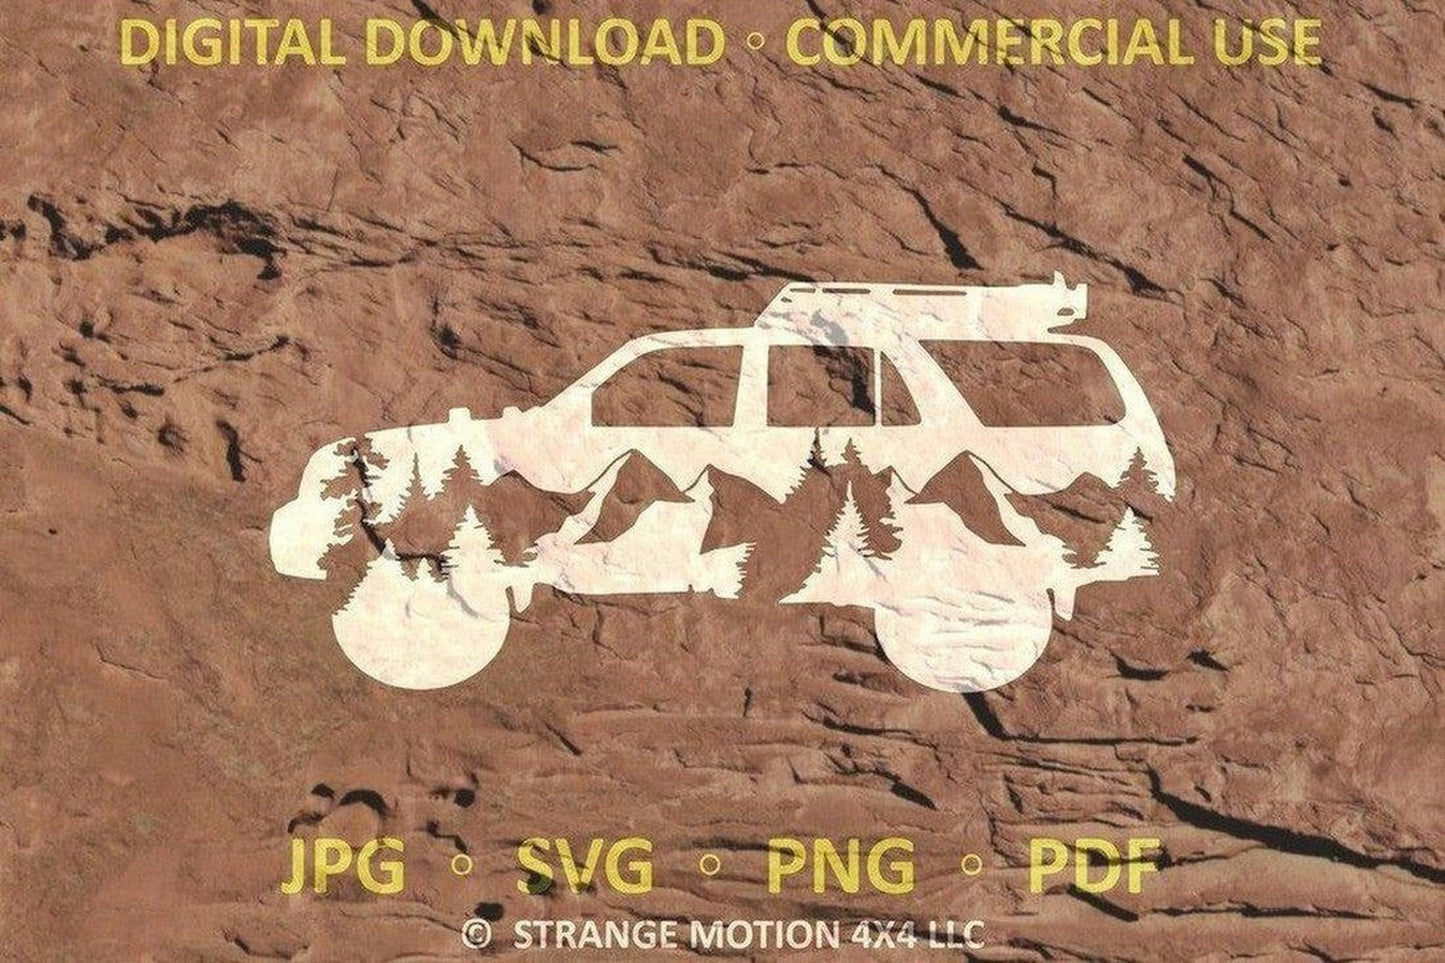 4th Gen Mountain File Pack for 4Runner - Commercial Use